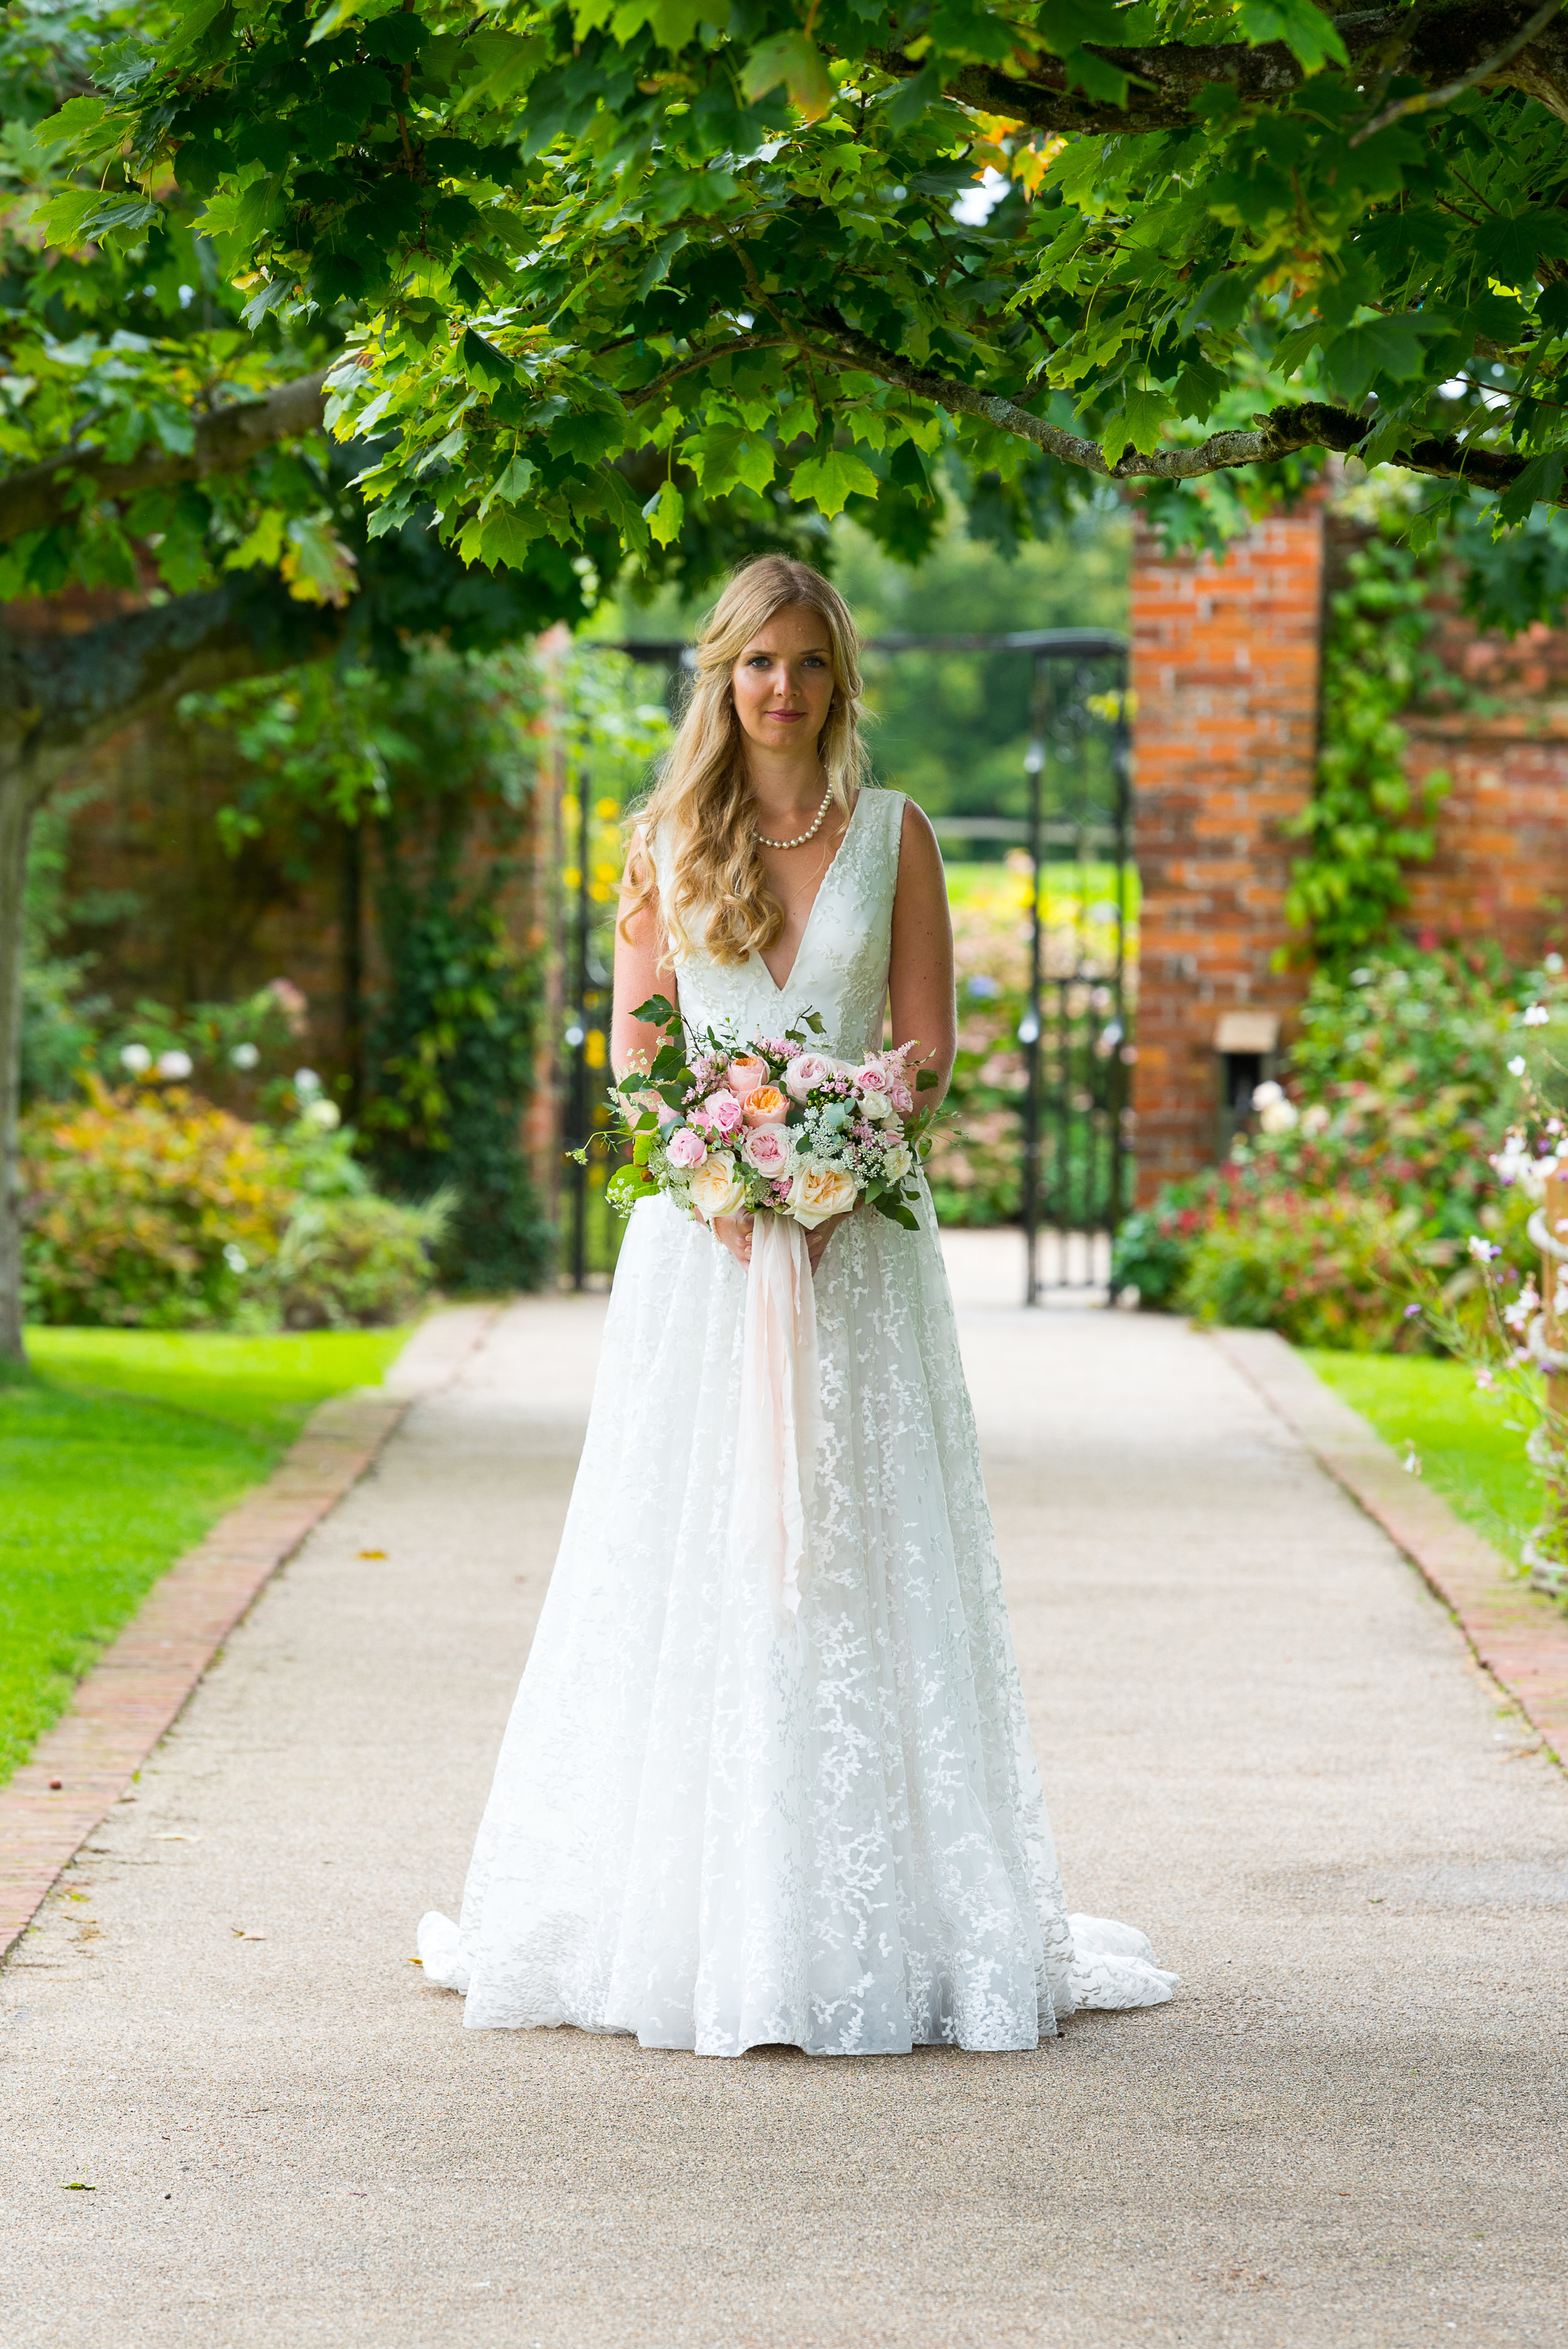 Modern English Rose Bride,  Flowers by Petal and Wild, Image by VBM Photography-39.jpg